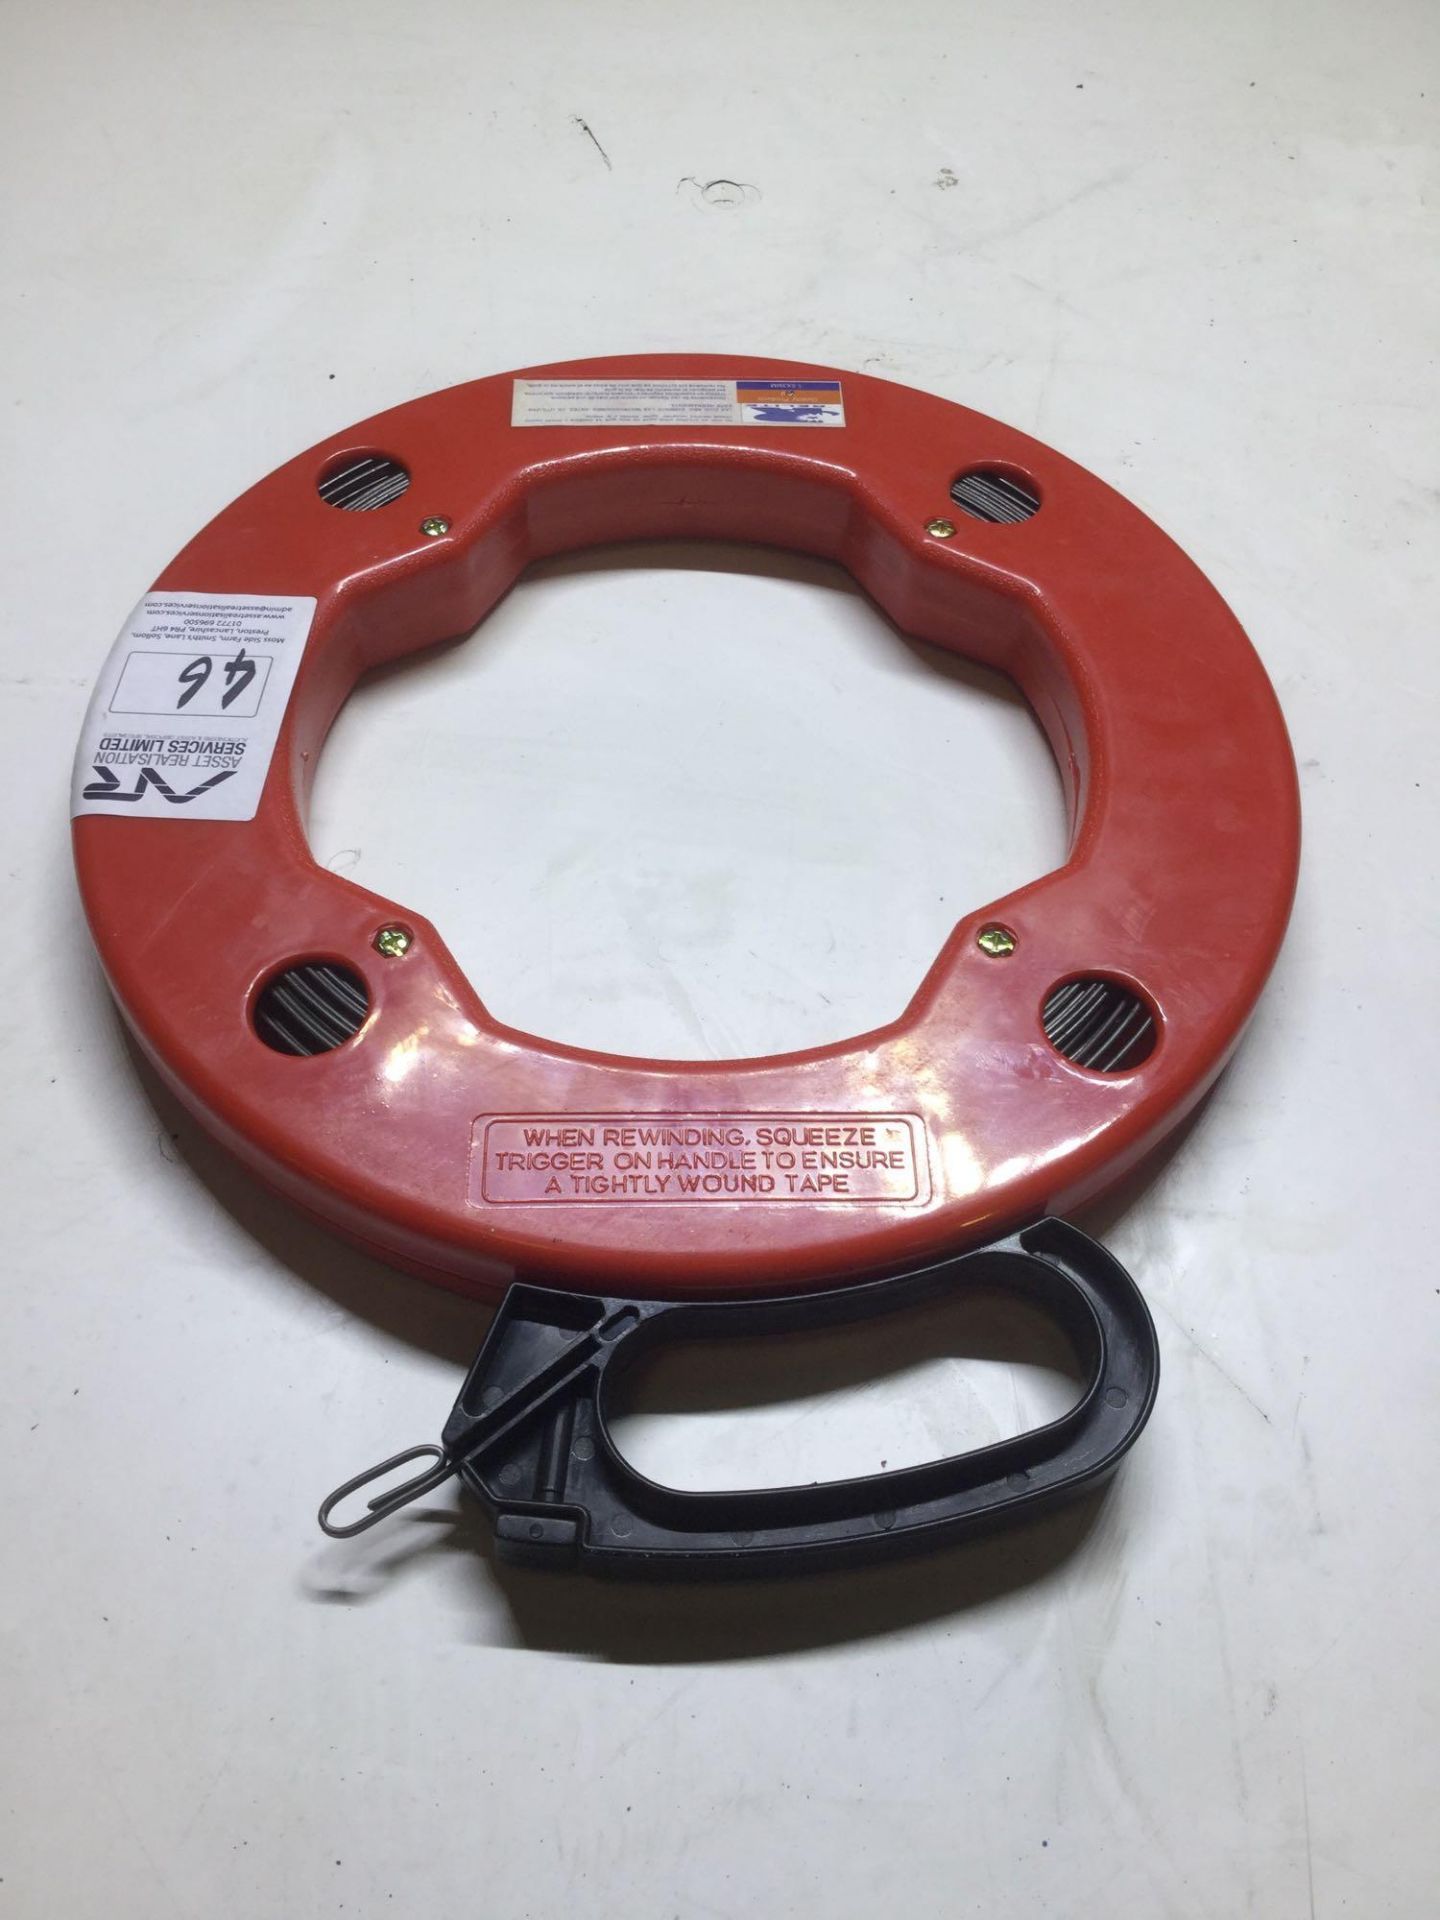 Relite 60mtr Cable Puller - Image 2 of 3